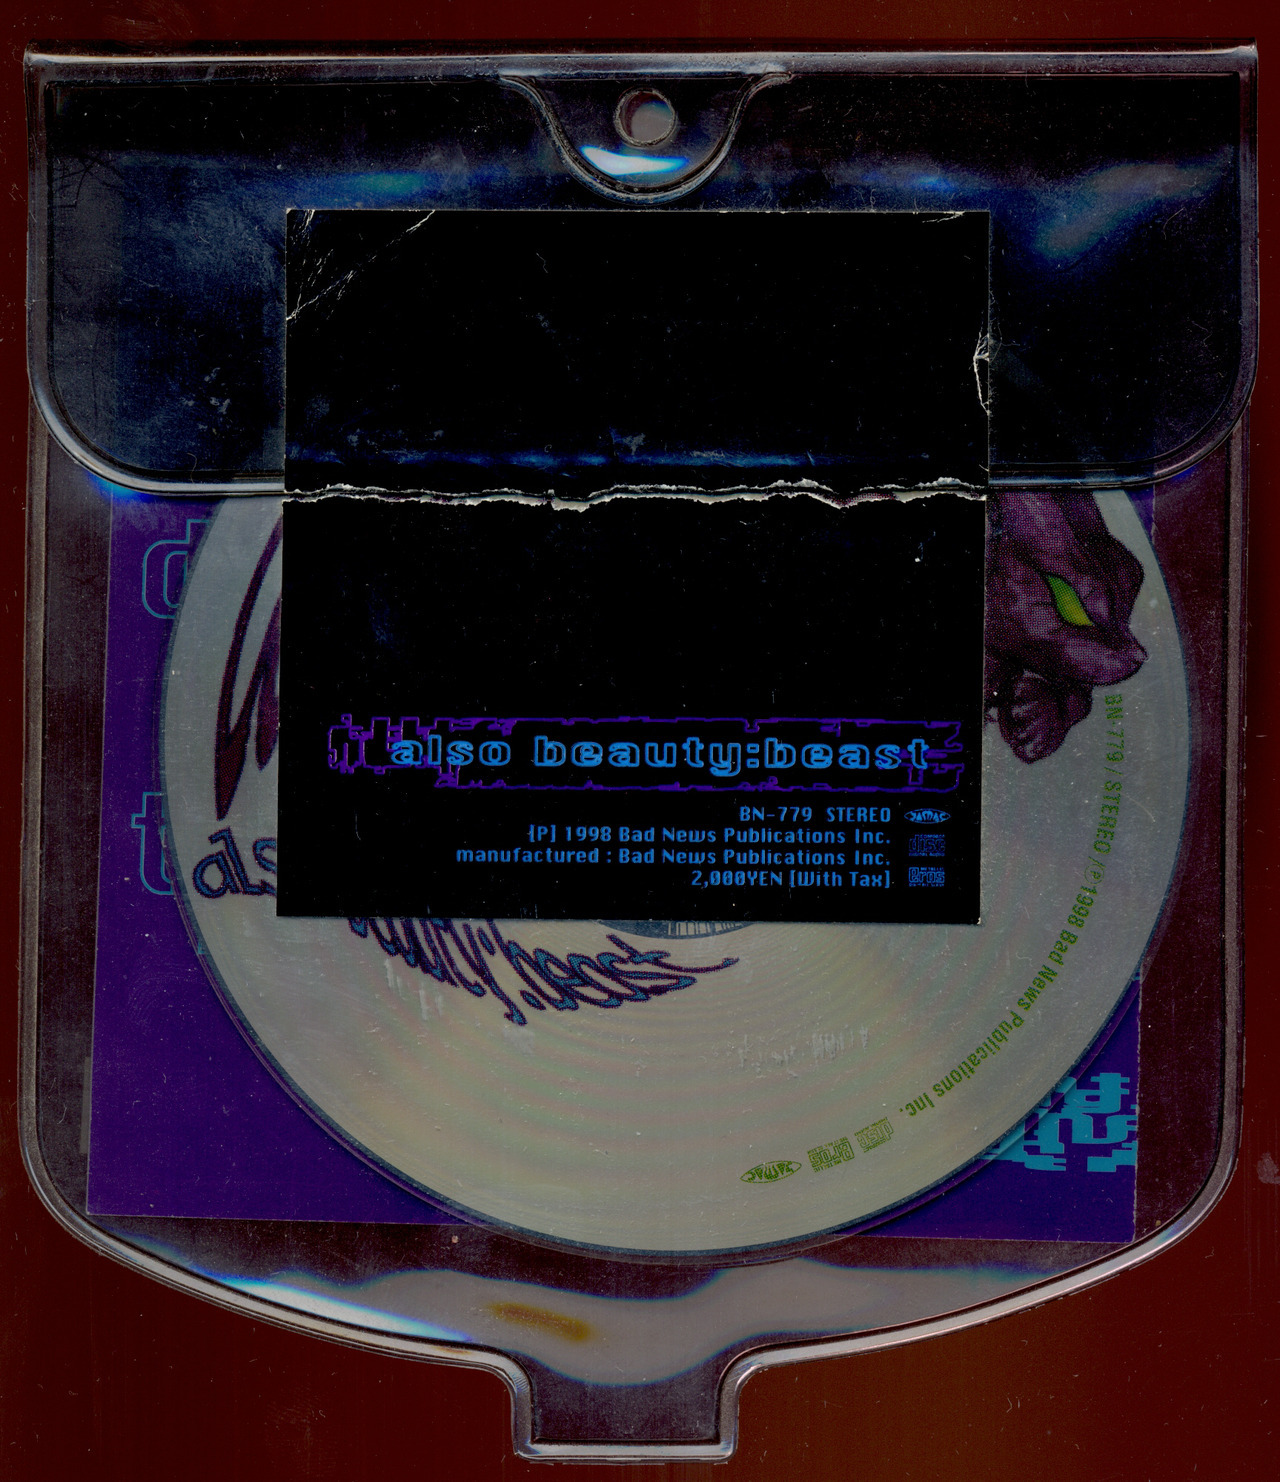 image therapy — Beauty:Beast Dark Knight Compact Disc (1998) 